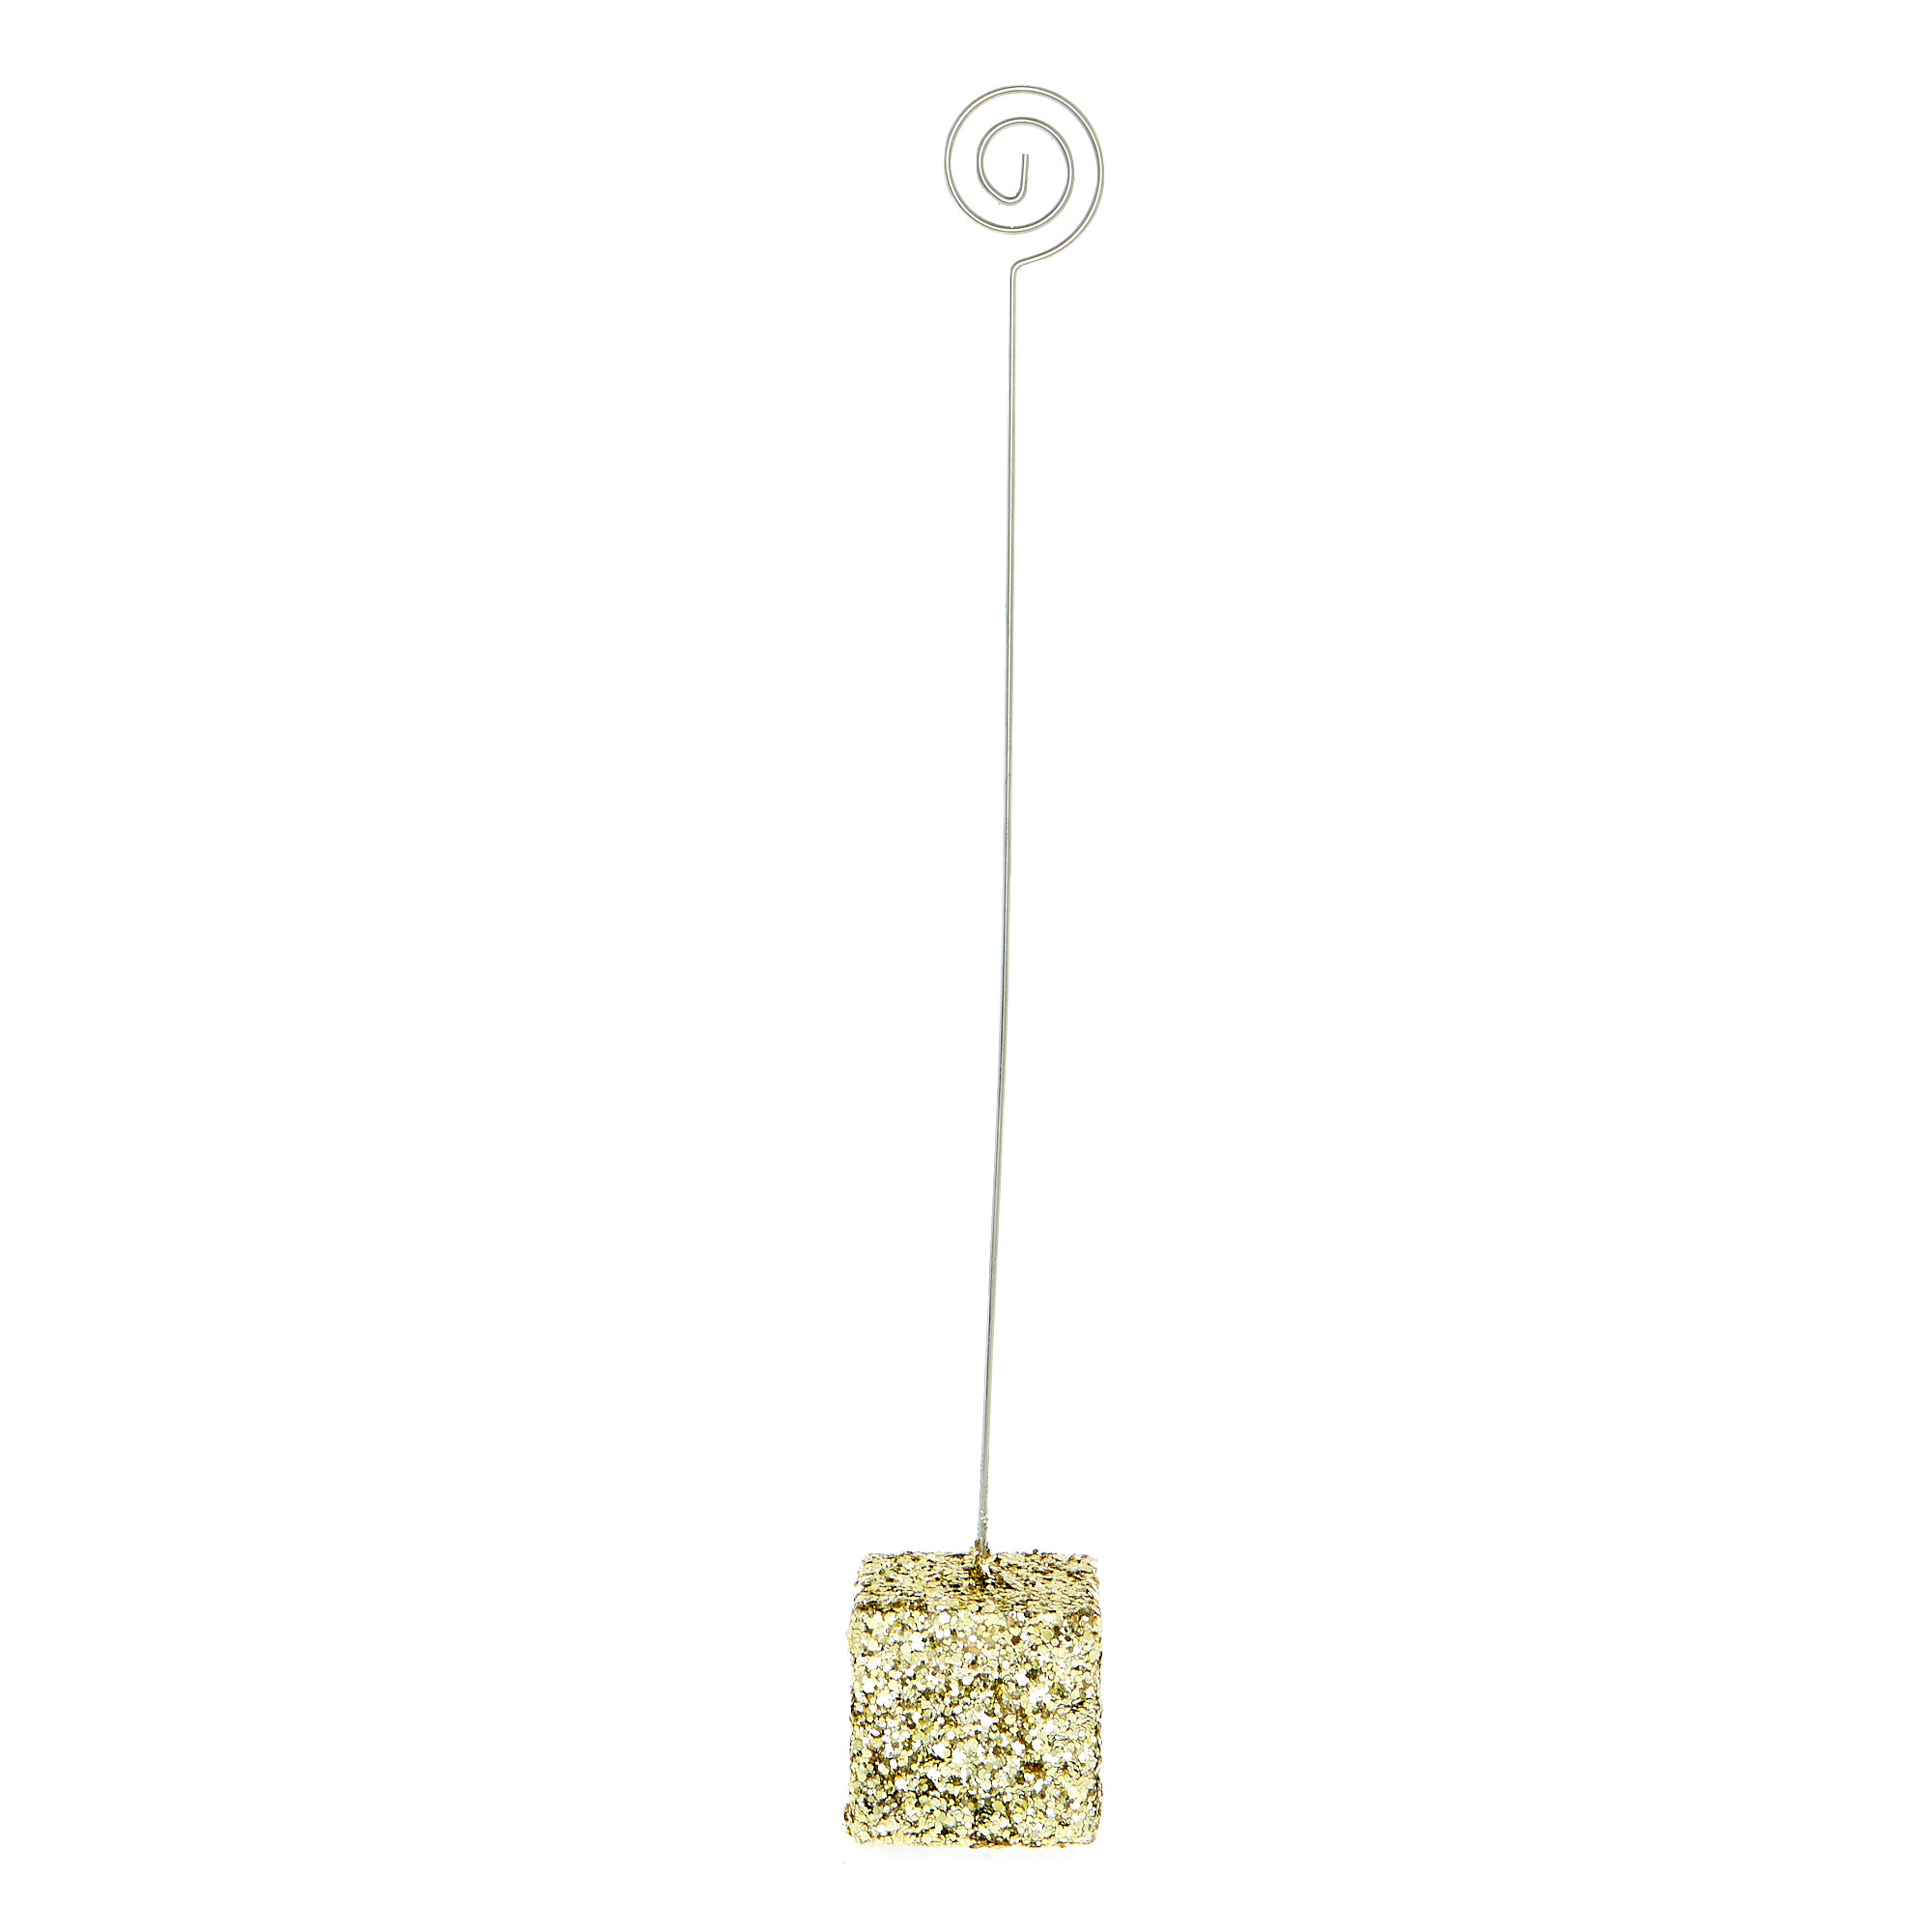 Gold Glittery Table Card Holder